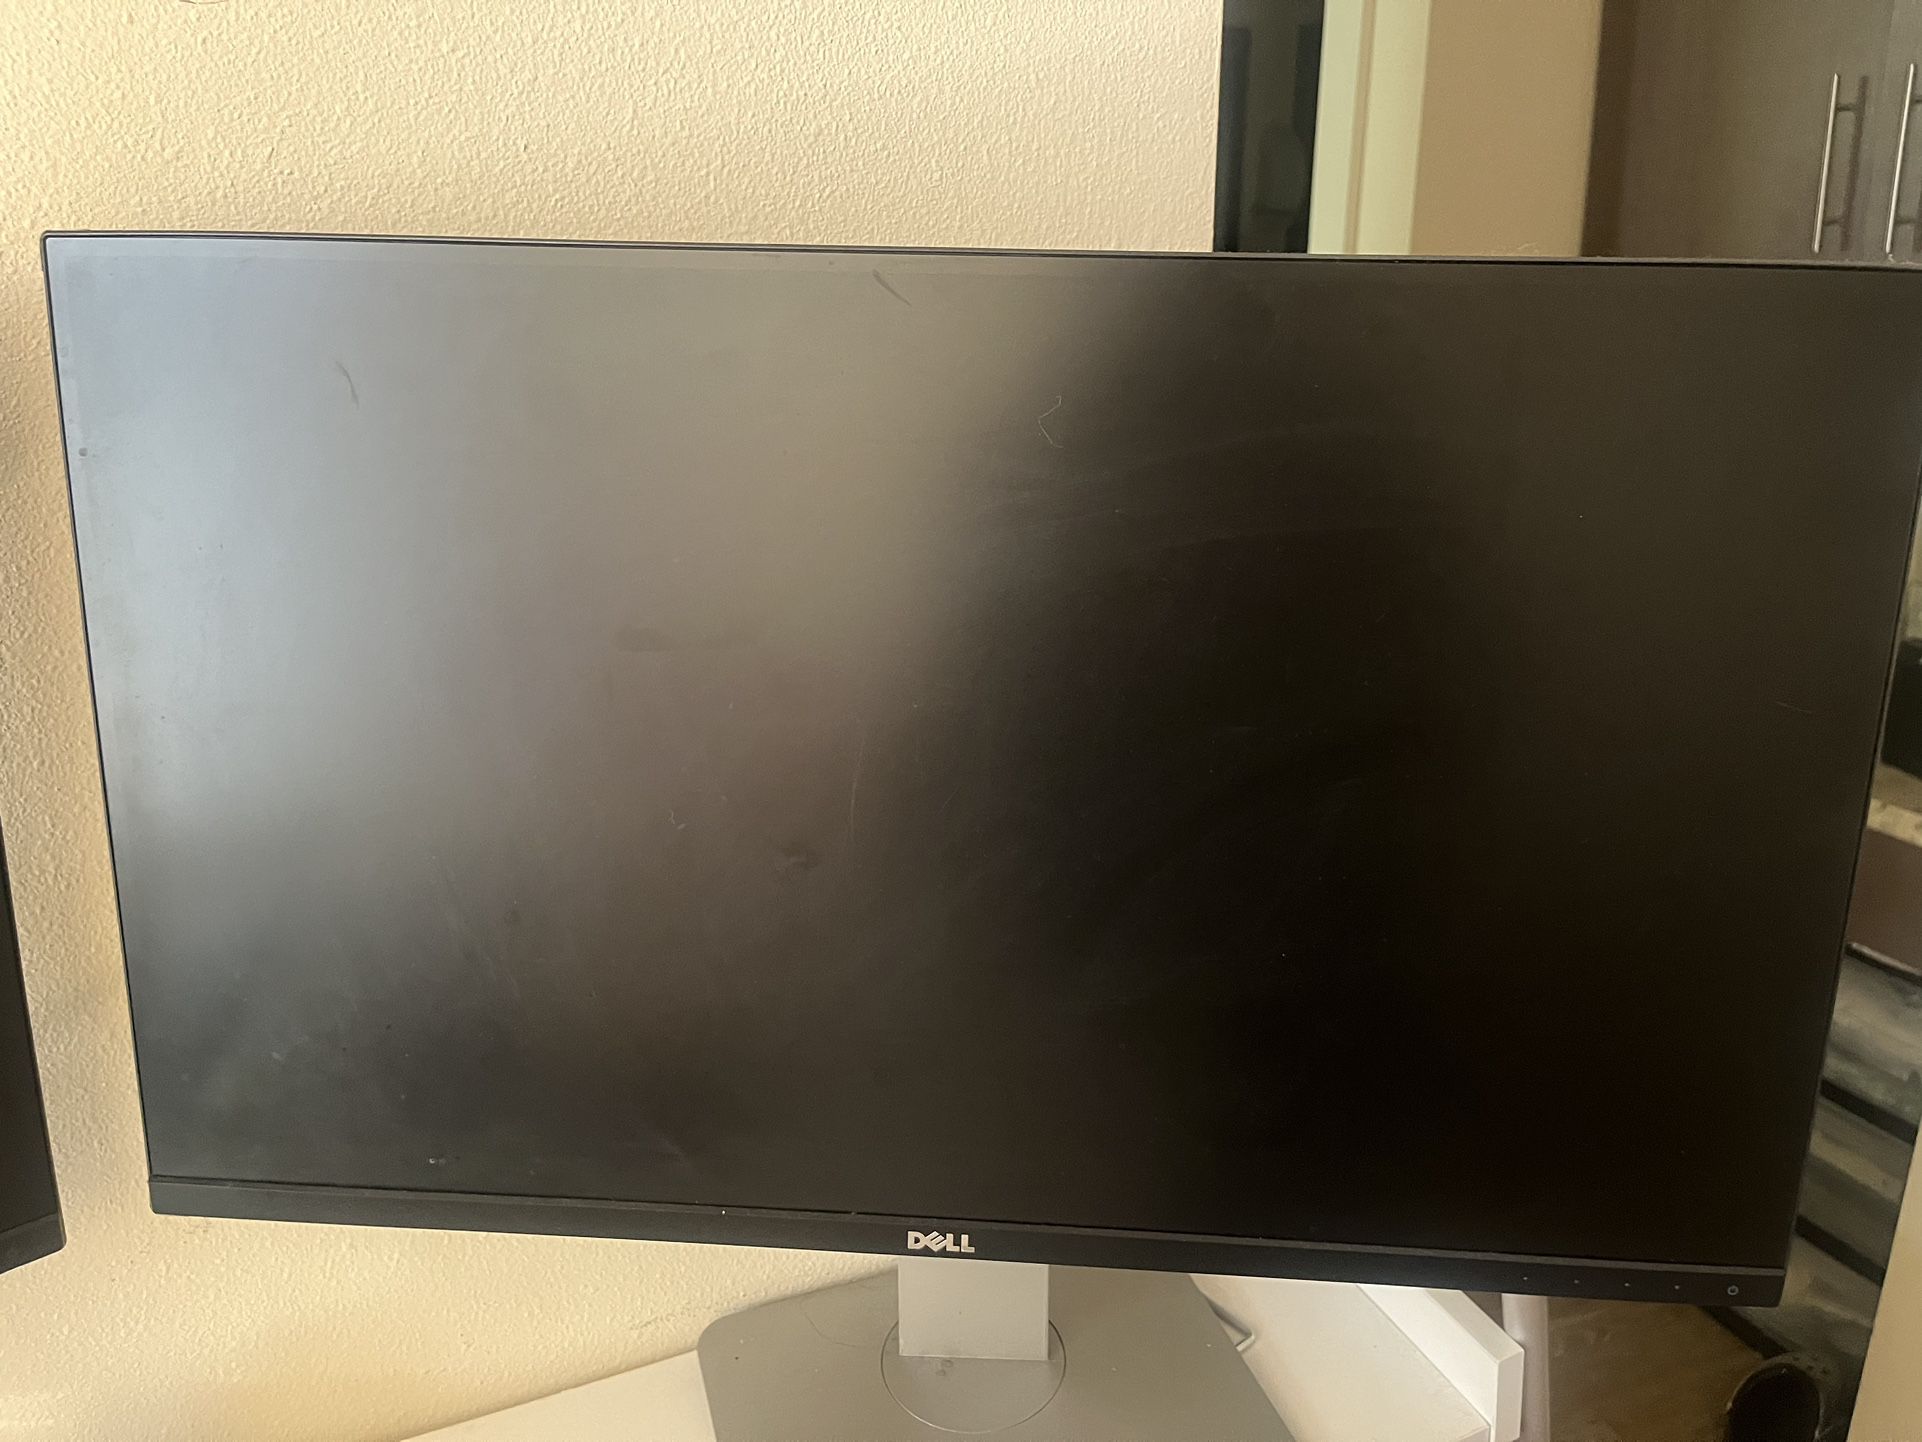 2 Dell LED Monitors + Package 